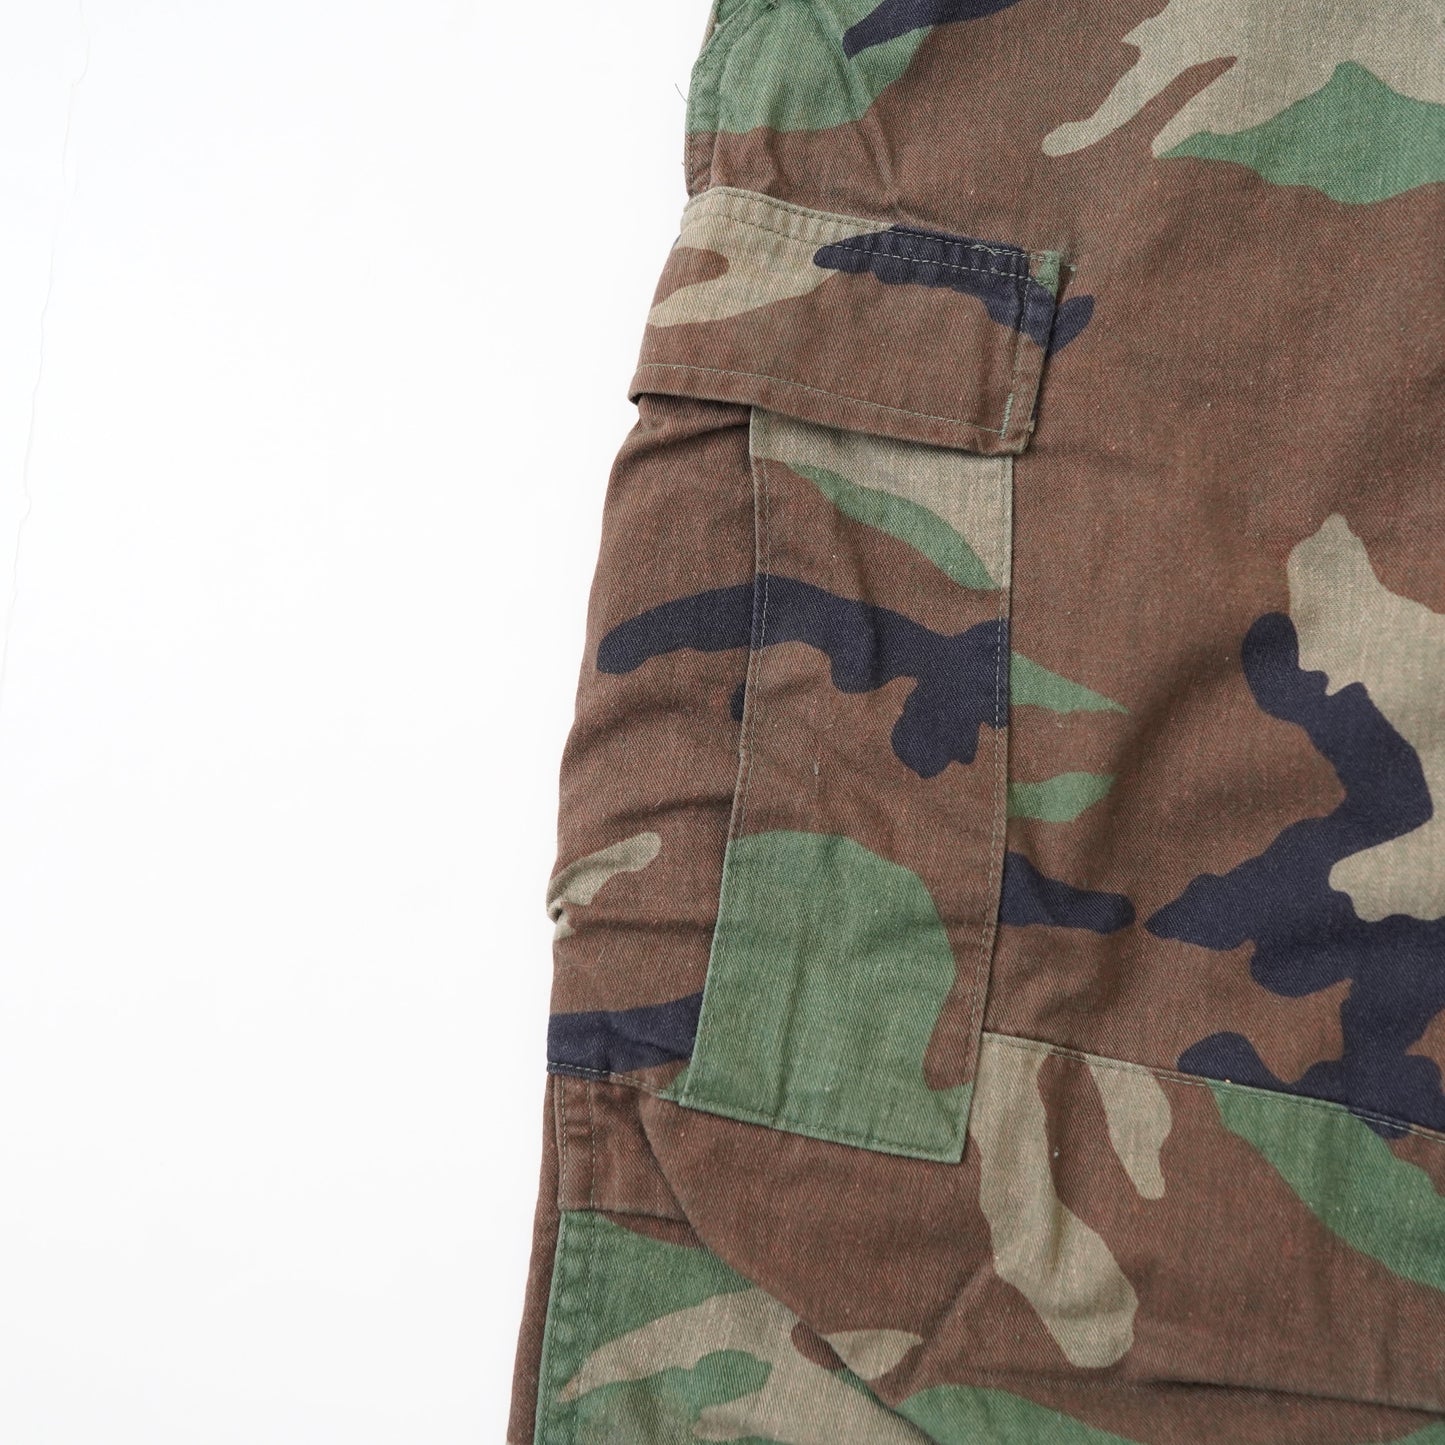 camouflage military pants